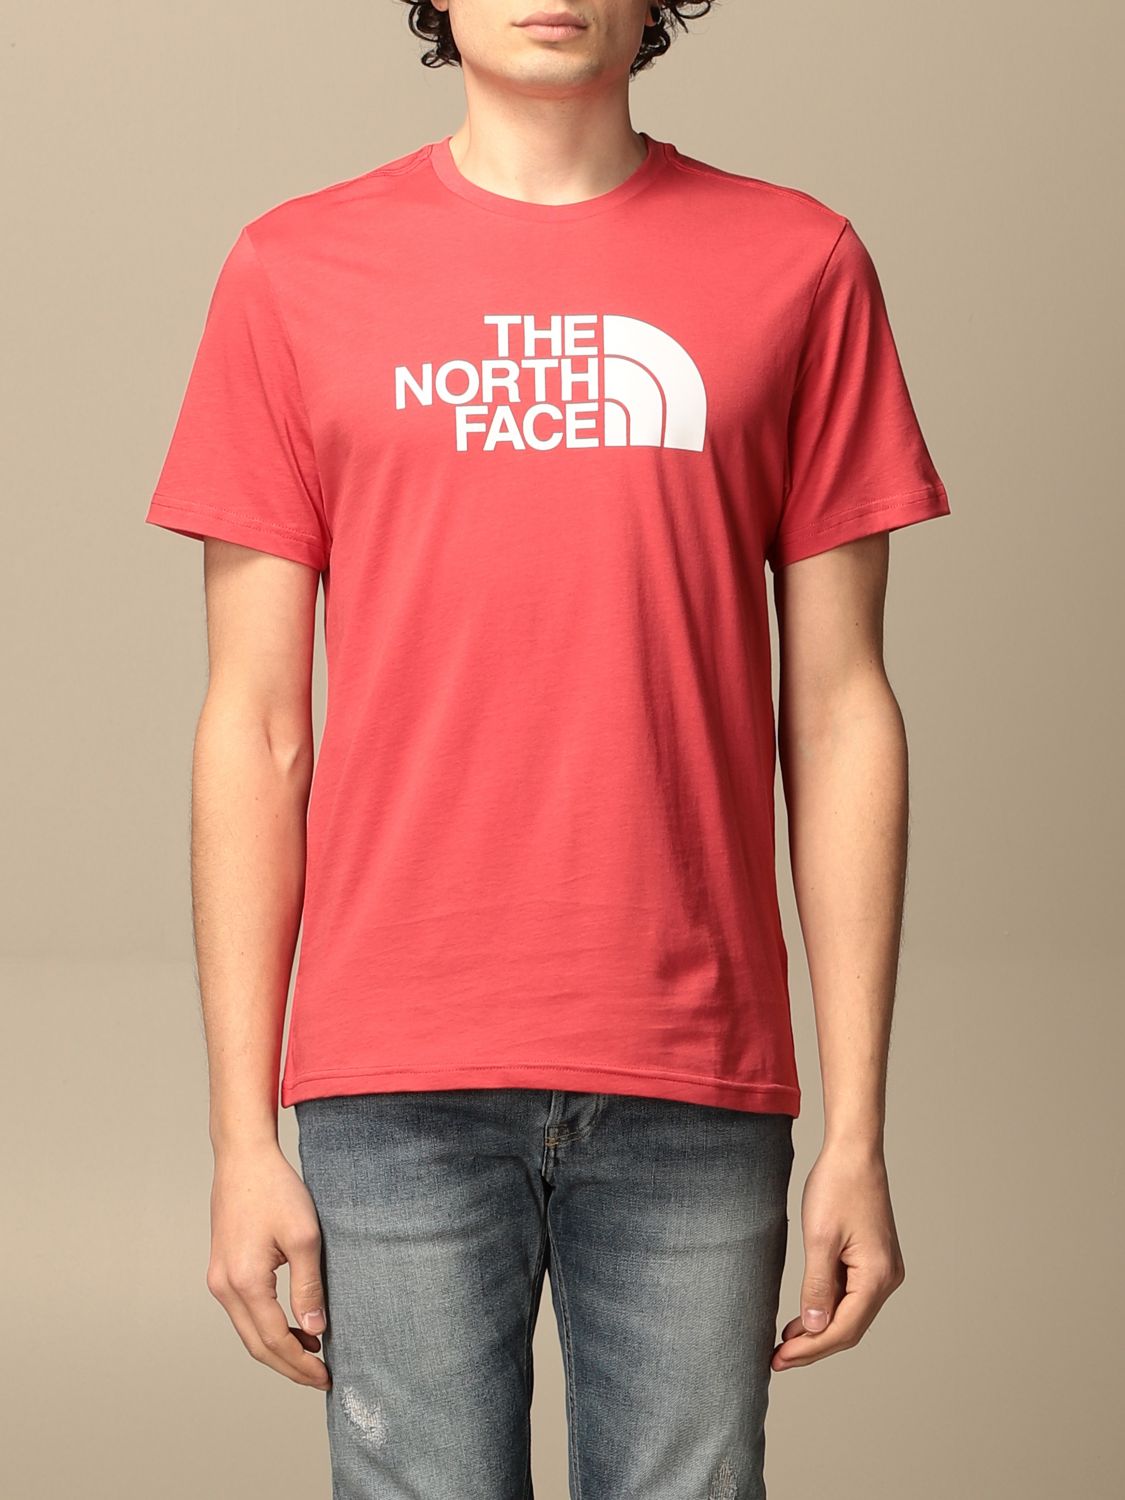 north face t shirt red